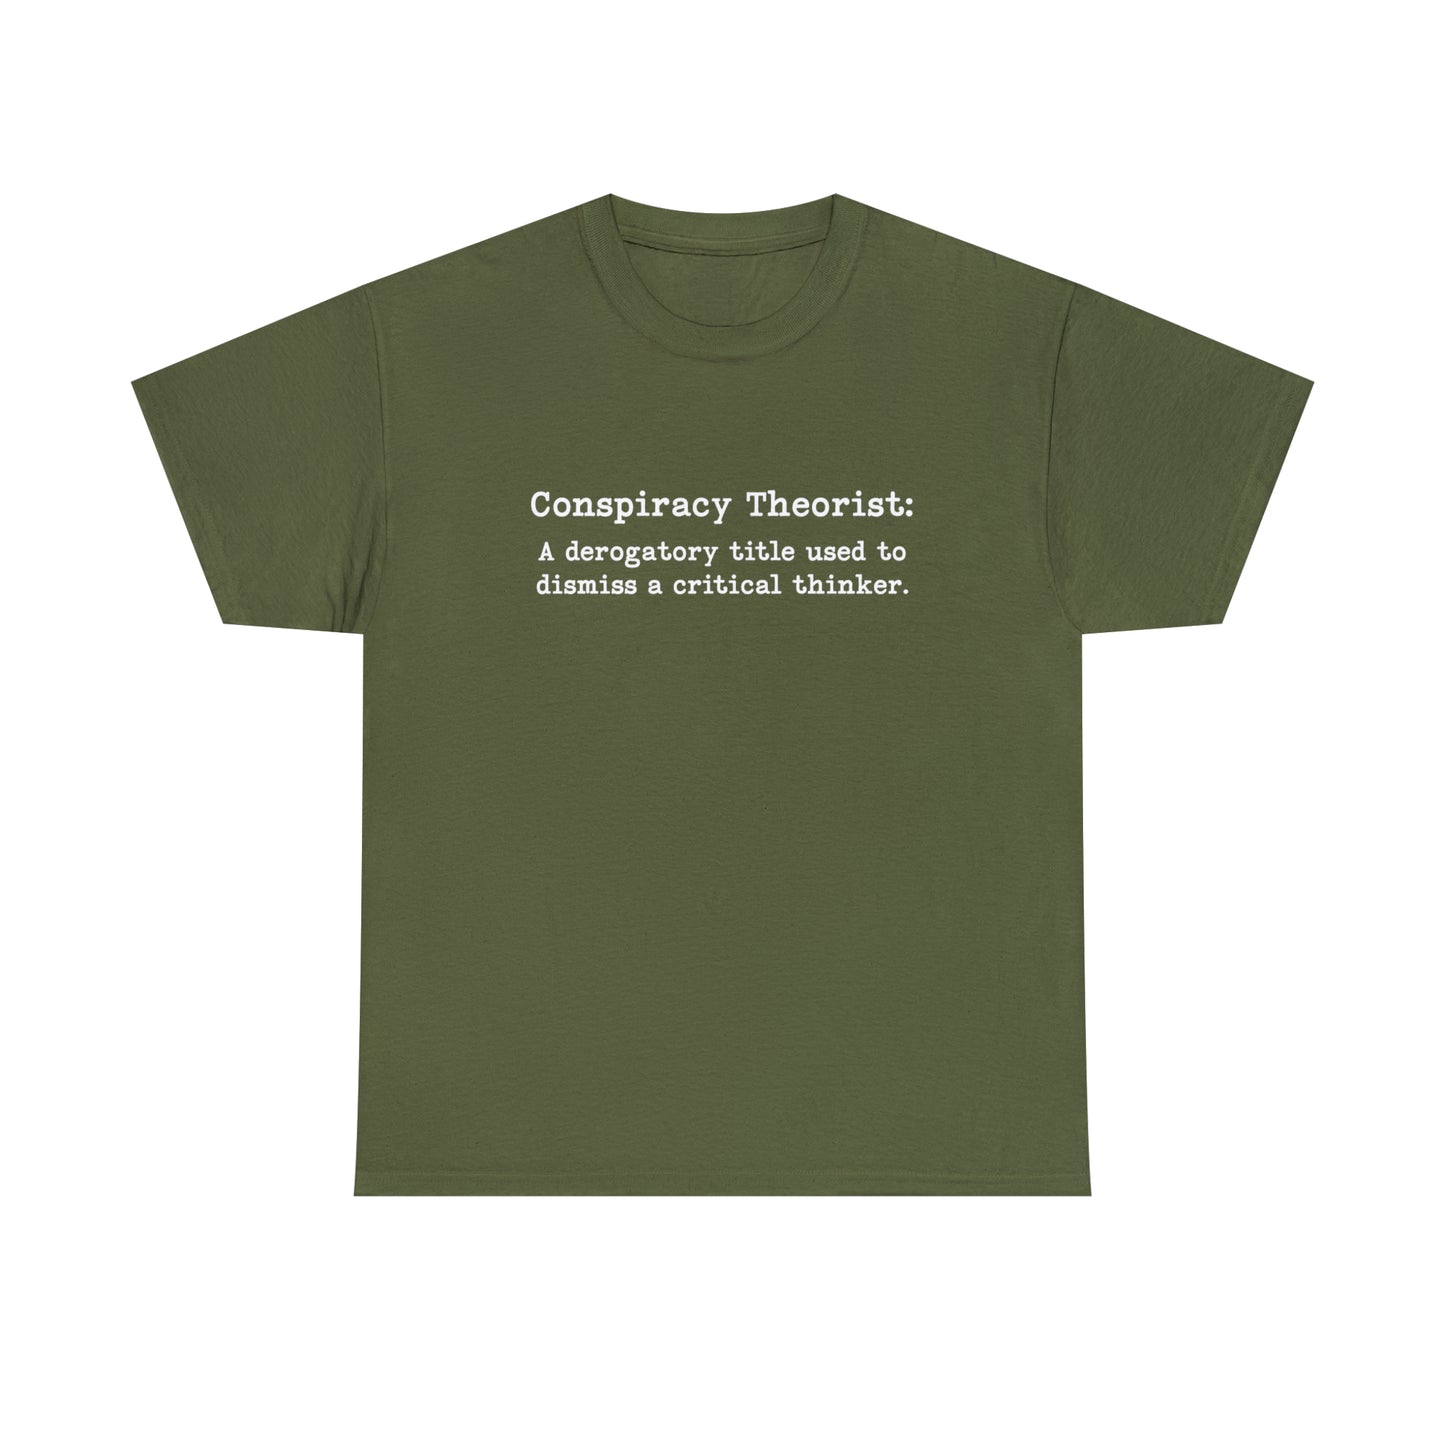 Conspiracy Theorist Definition T-Shirt For Conspiracy Realist TShirt For Conservative T Shirt For Global Agenda Shirt For Patriot Tee